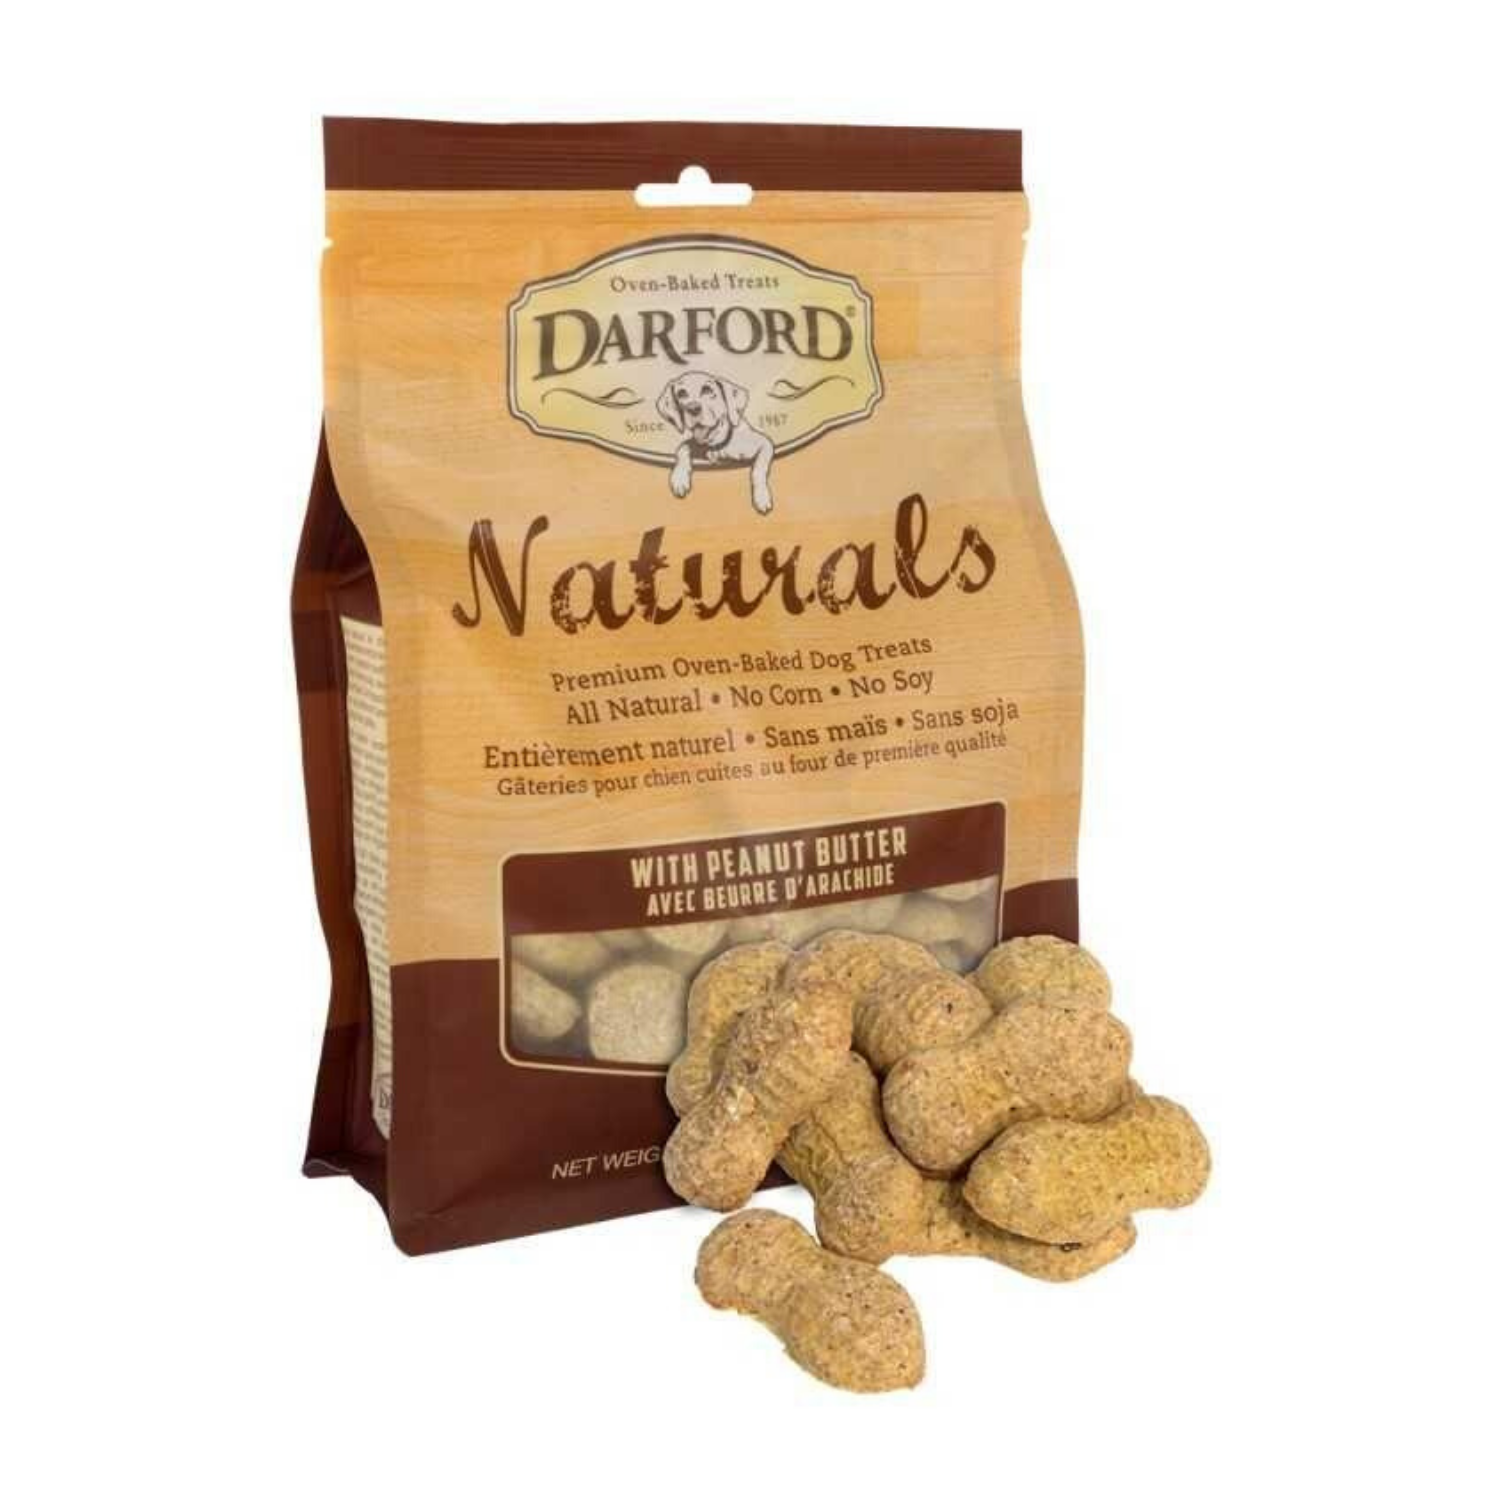 [DISCONTINUED] Darford Naturals (Peanut Butter) for Dogs - 170g / 400g